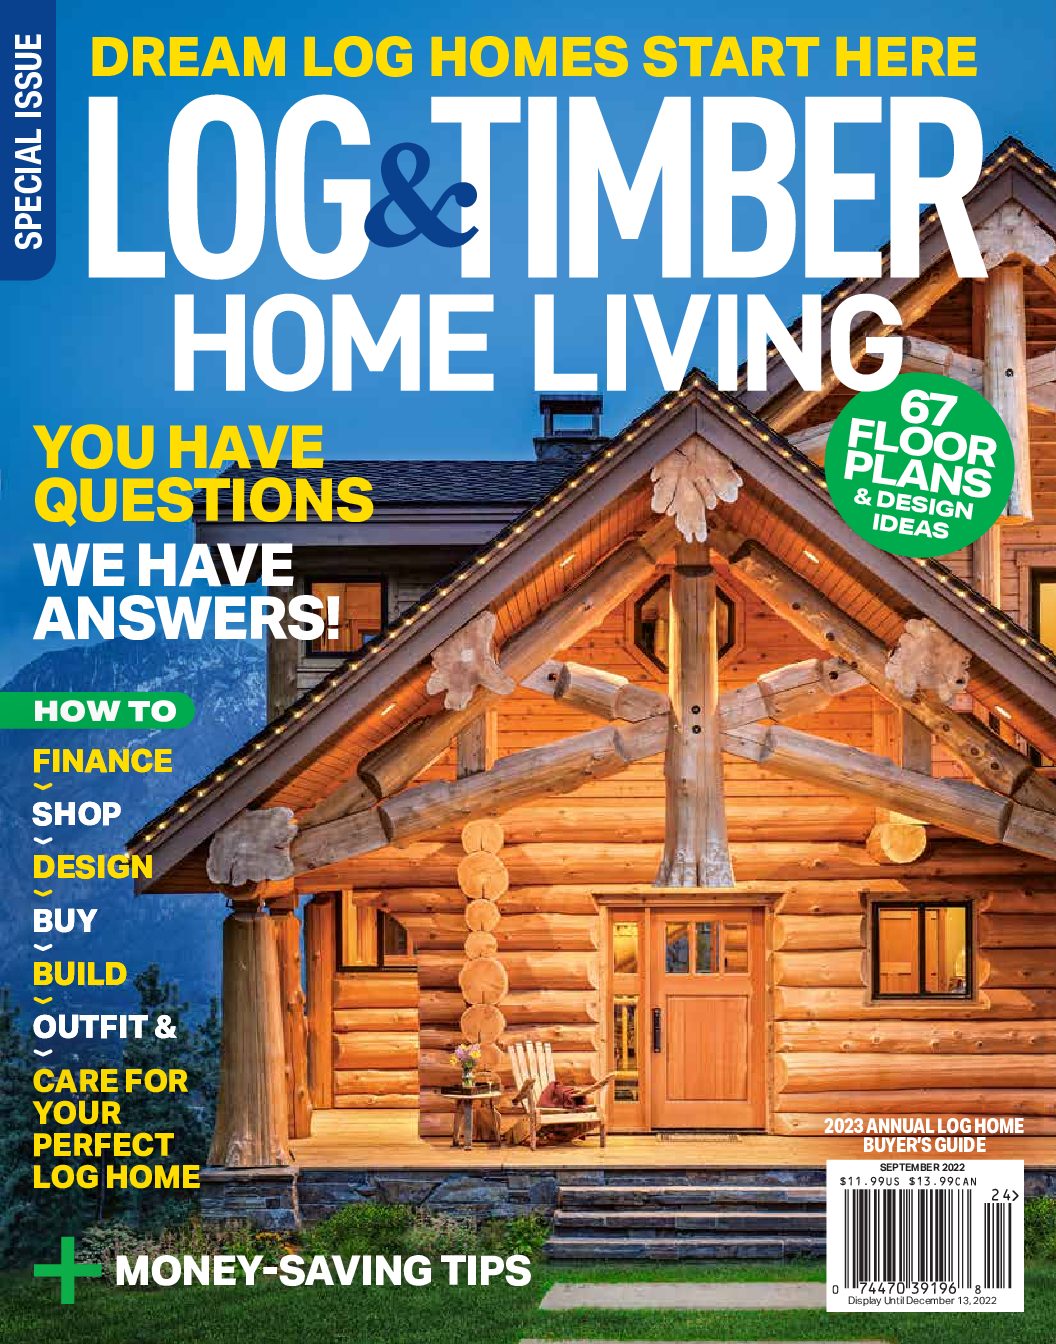 Log & Timber Home Living- 2022 Buyers Guide